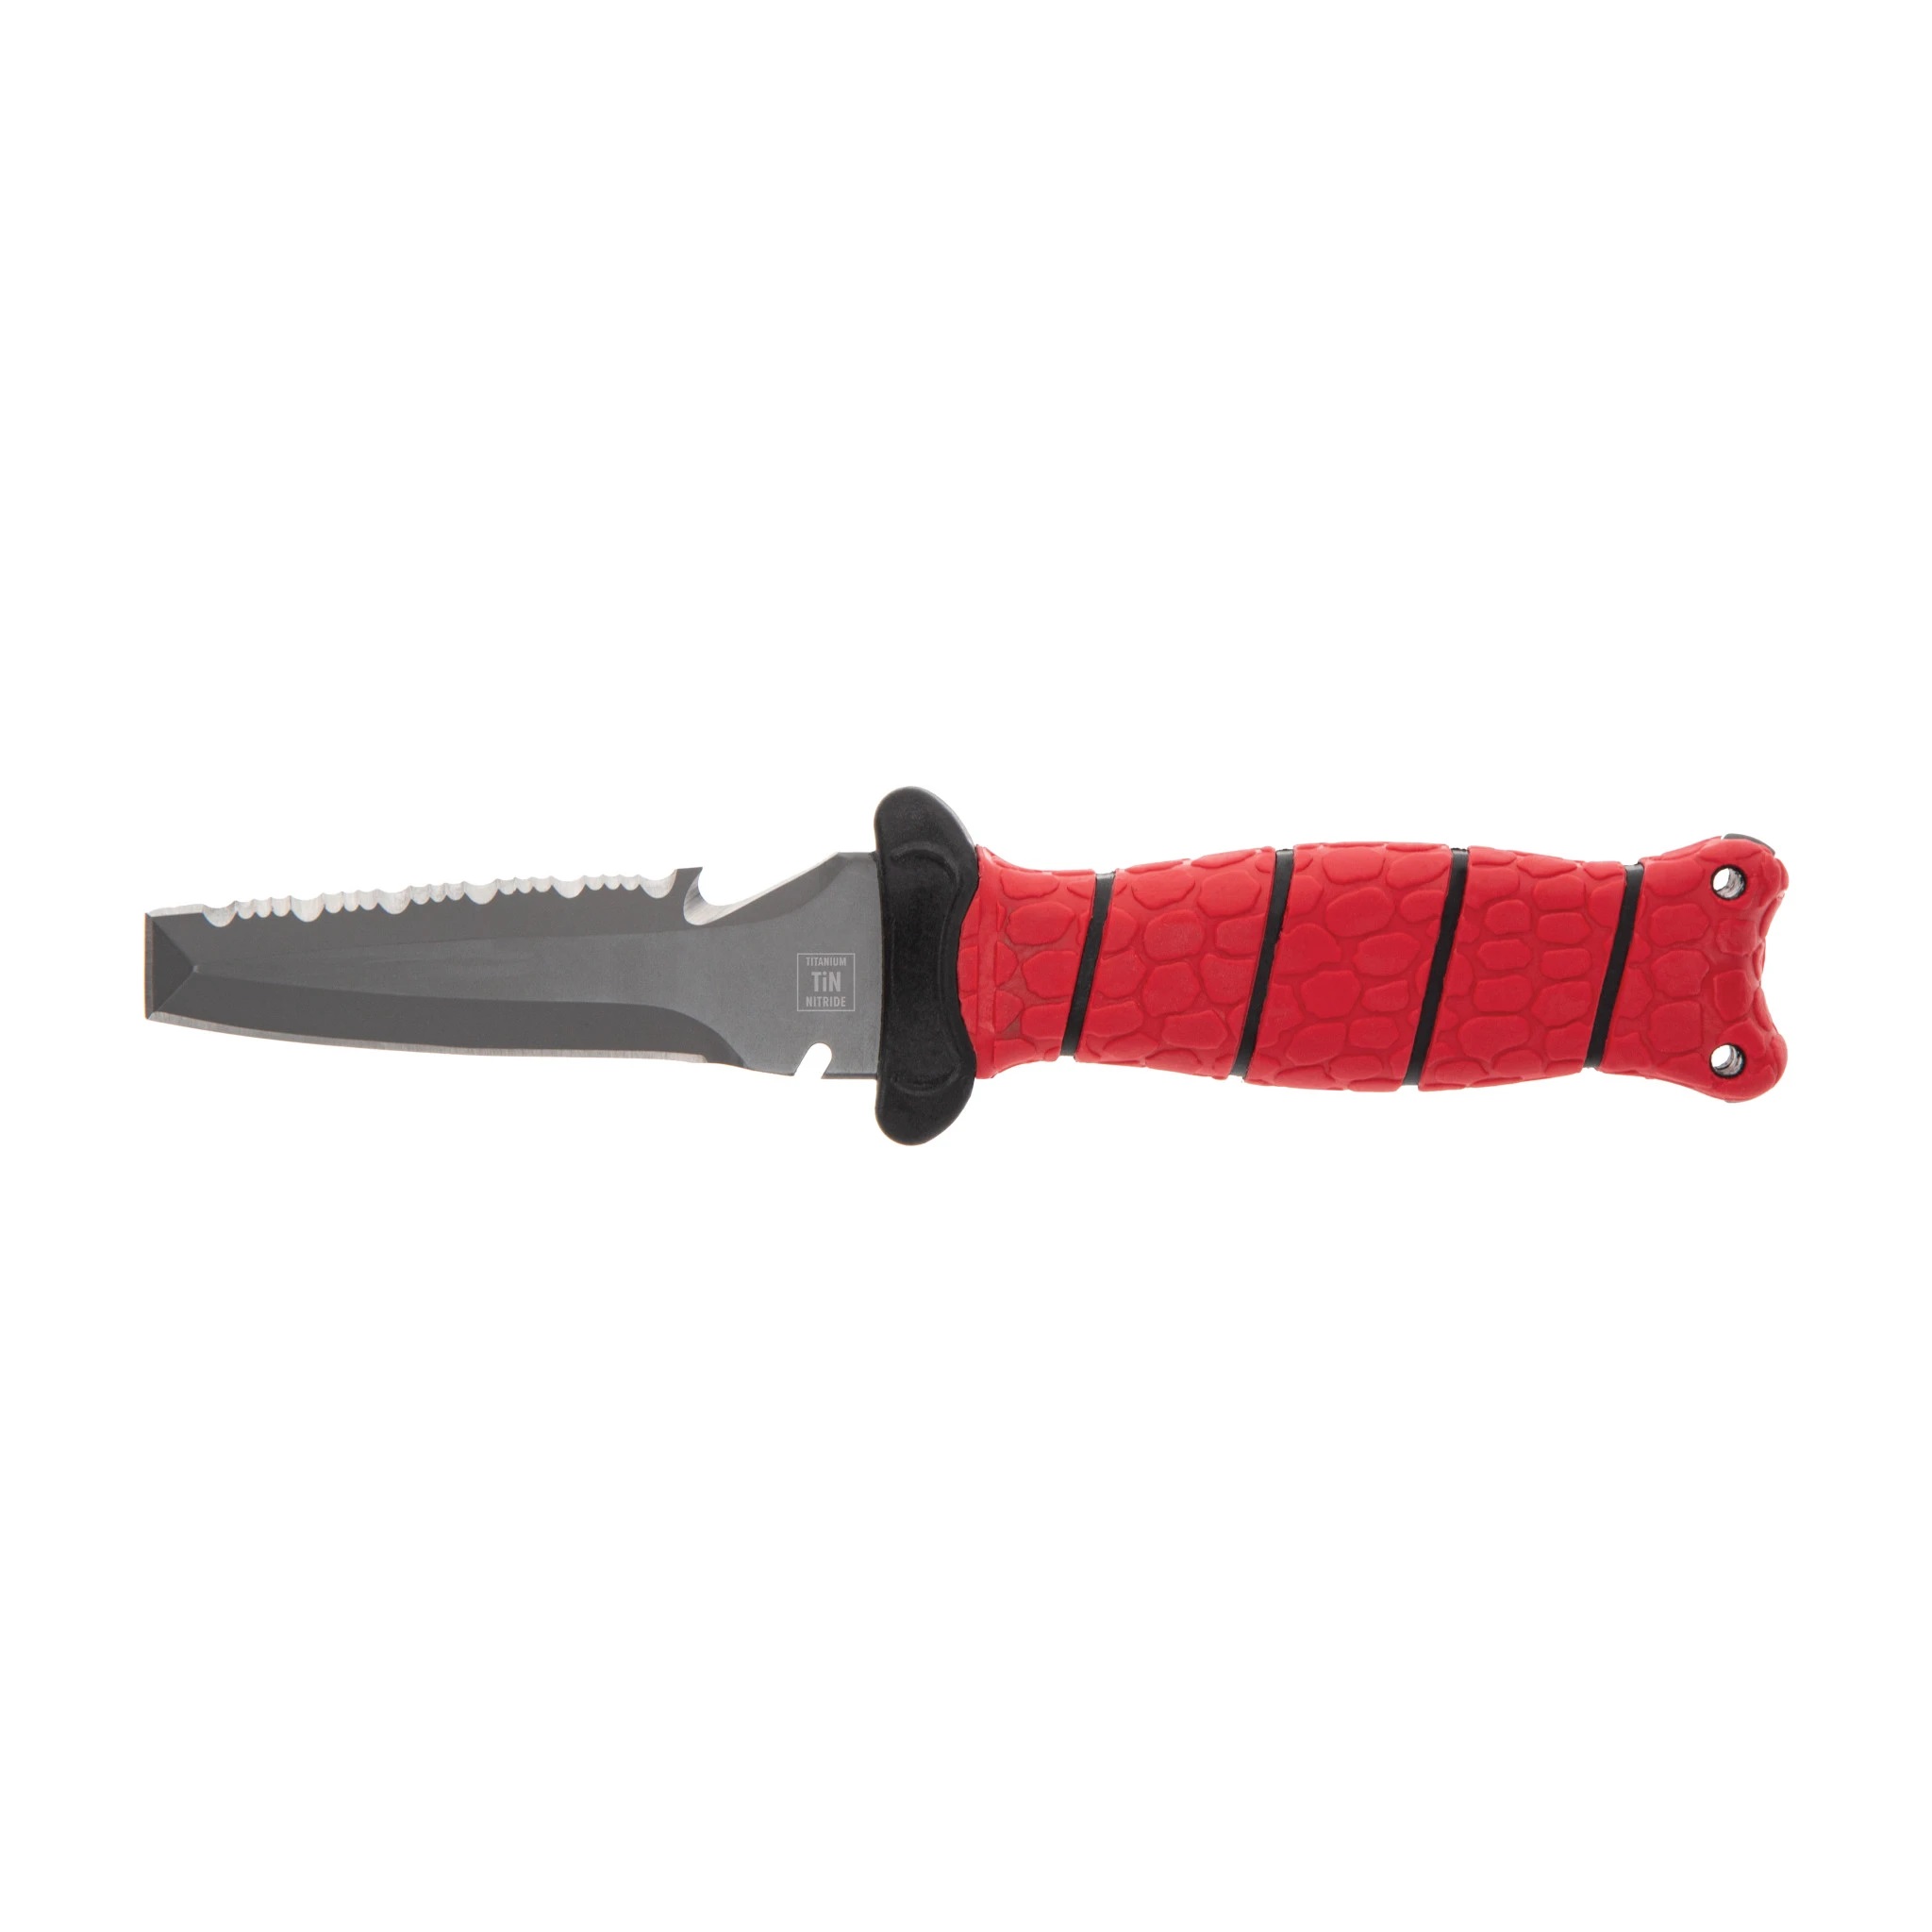 Bubba Blade Surf 9in Lithium Ion Electric Fillet Knife Blade